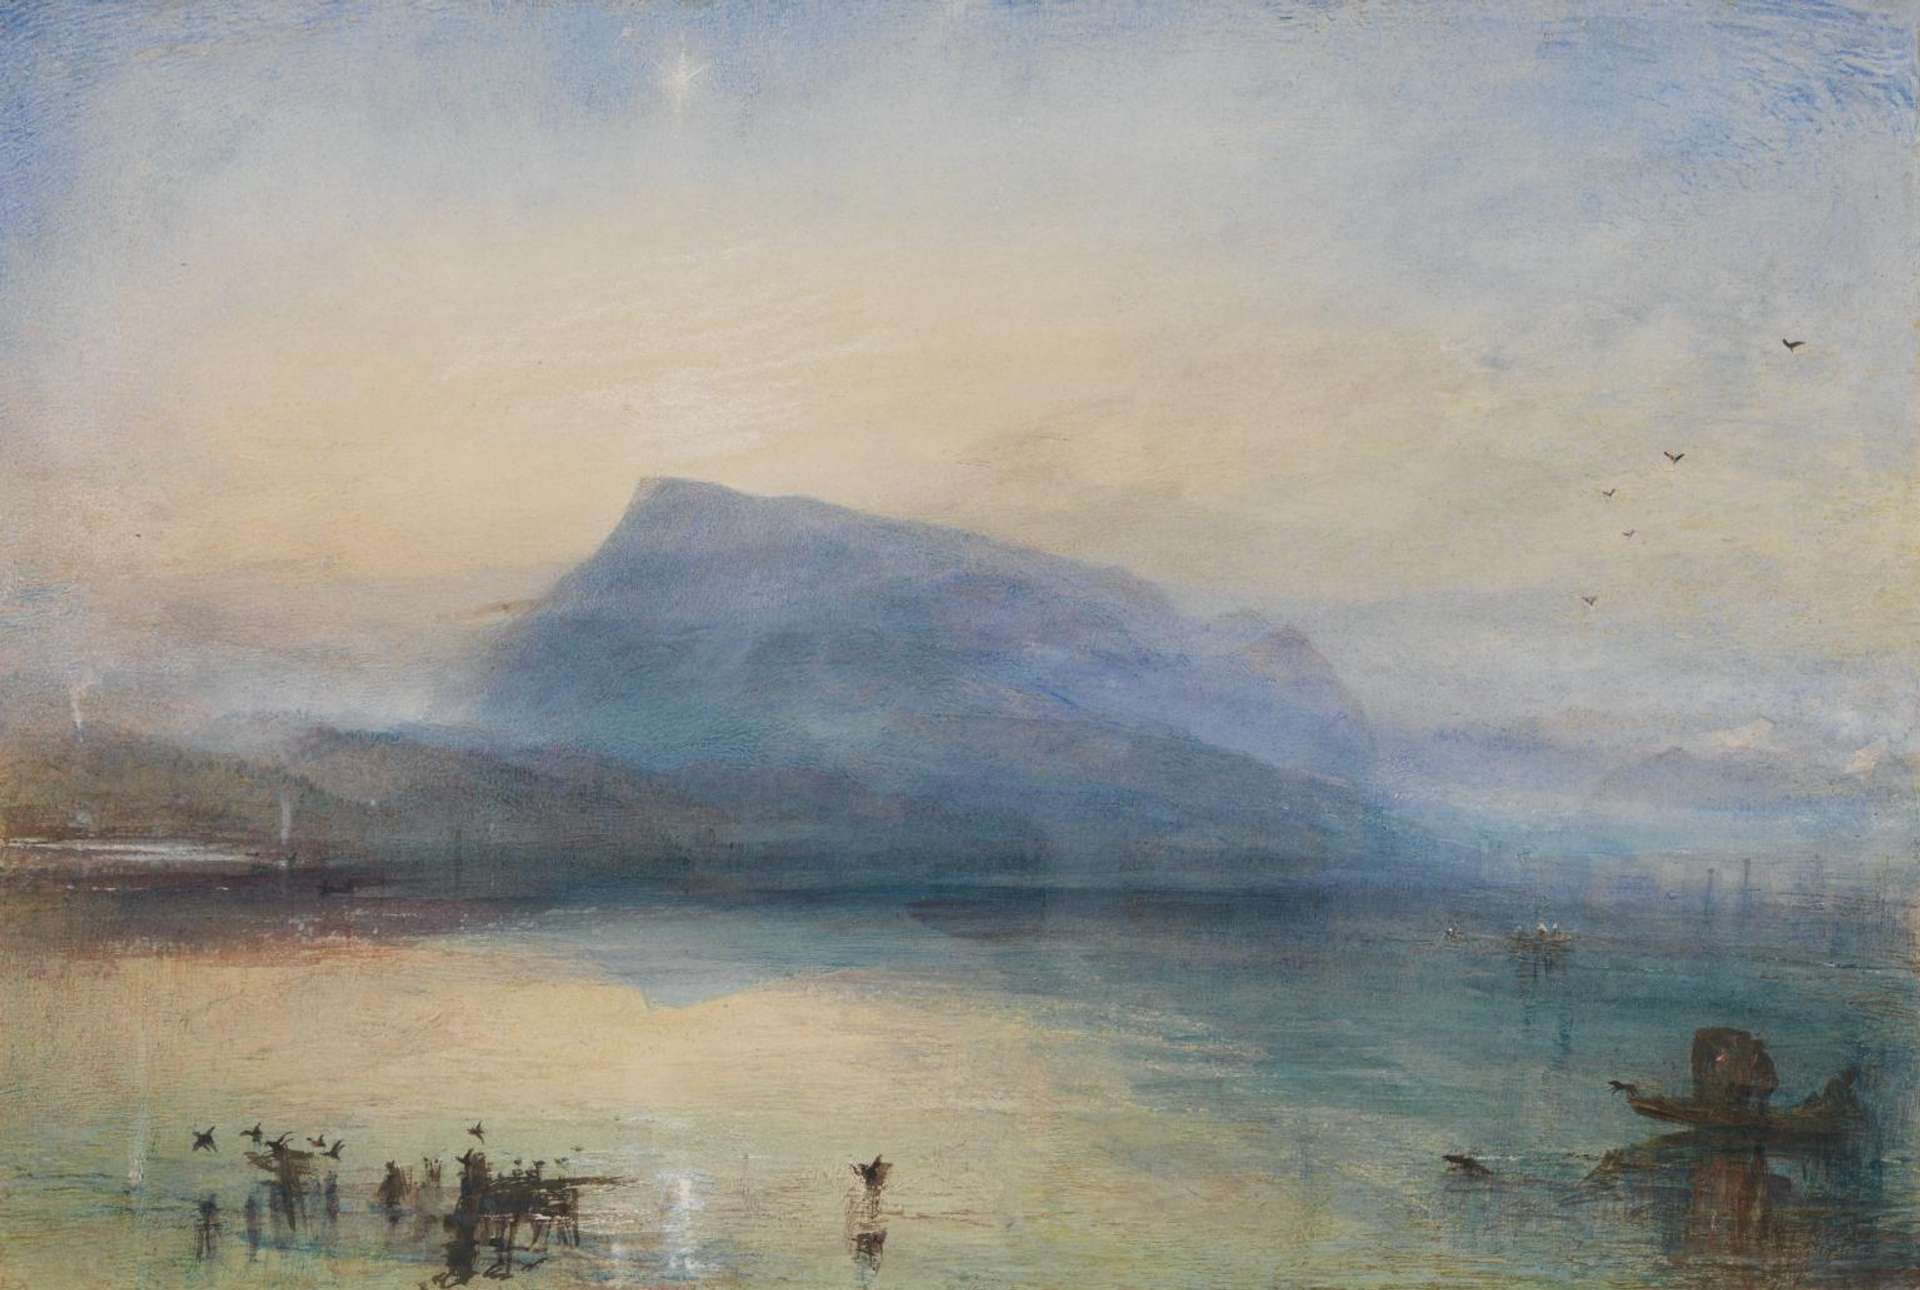 An image of the artwork The Blue Rigi, Sunrise by J.M.W. Turner. It depicts the Rigi mountain in Switzerland, across from Lake Lucerne, at sunrise.